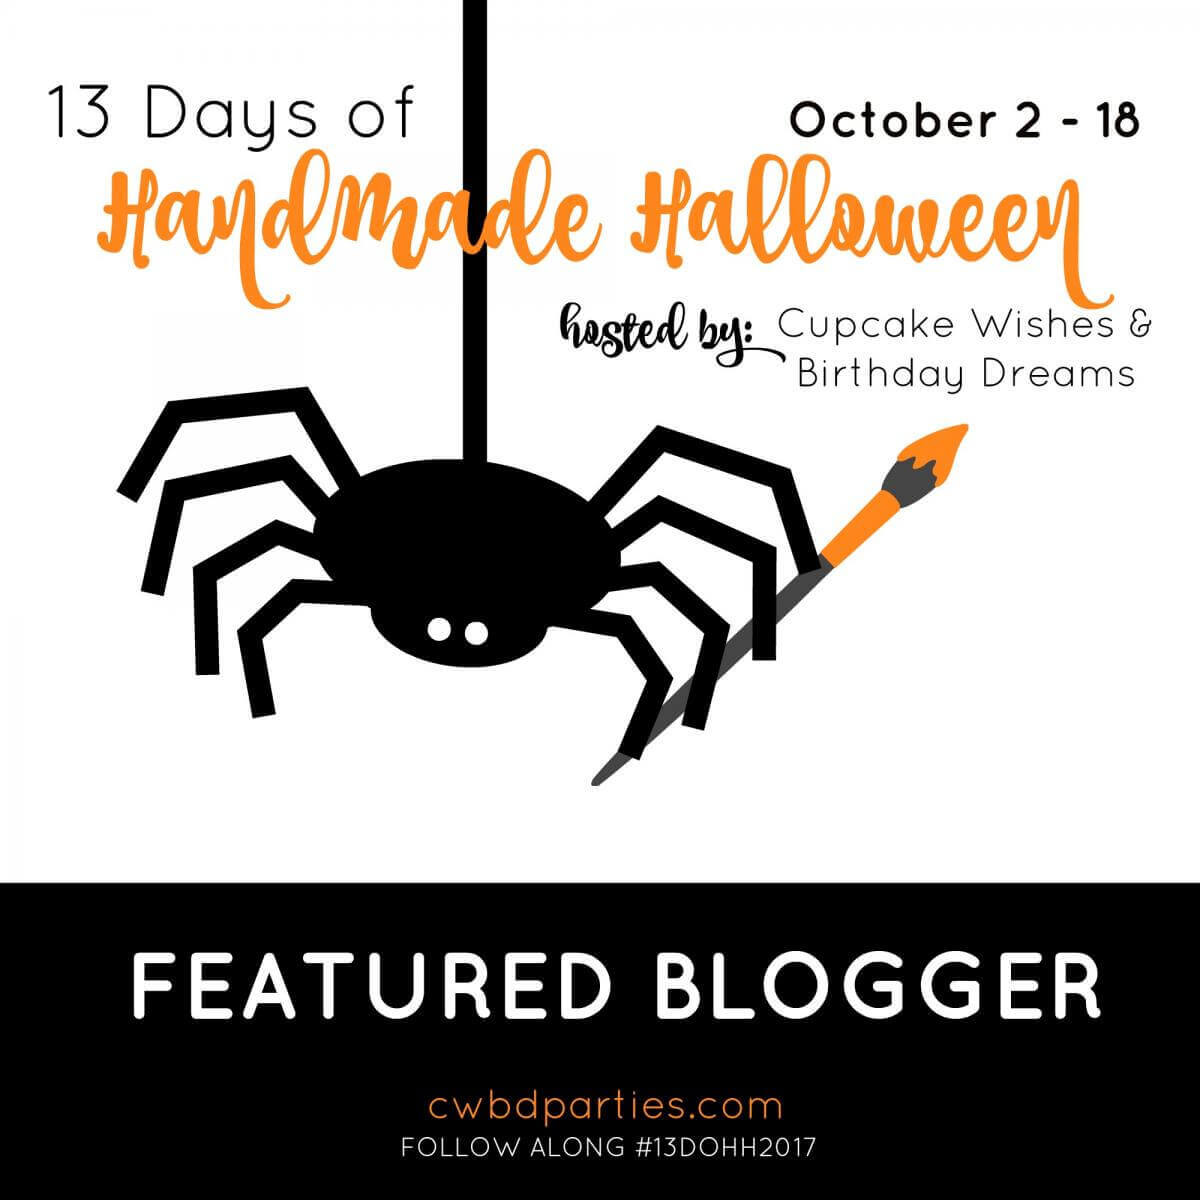 Illustration of a spider with a paintbrush, and text for the 13 days of Handmade Halloween Blog Hop.